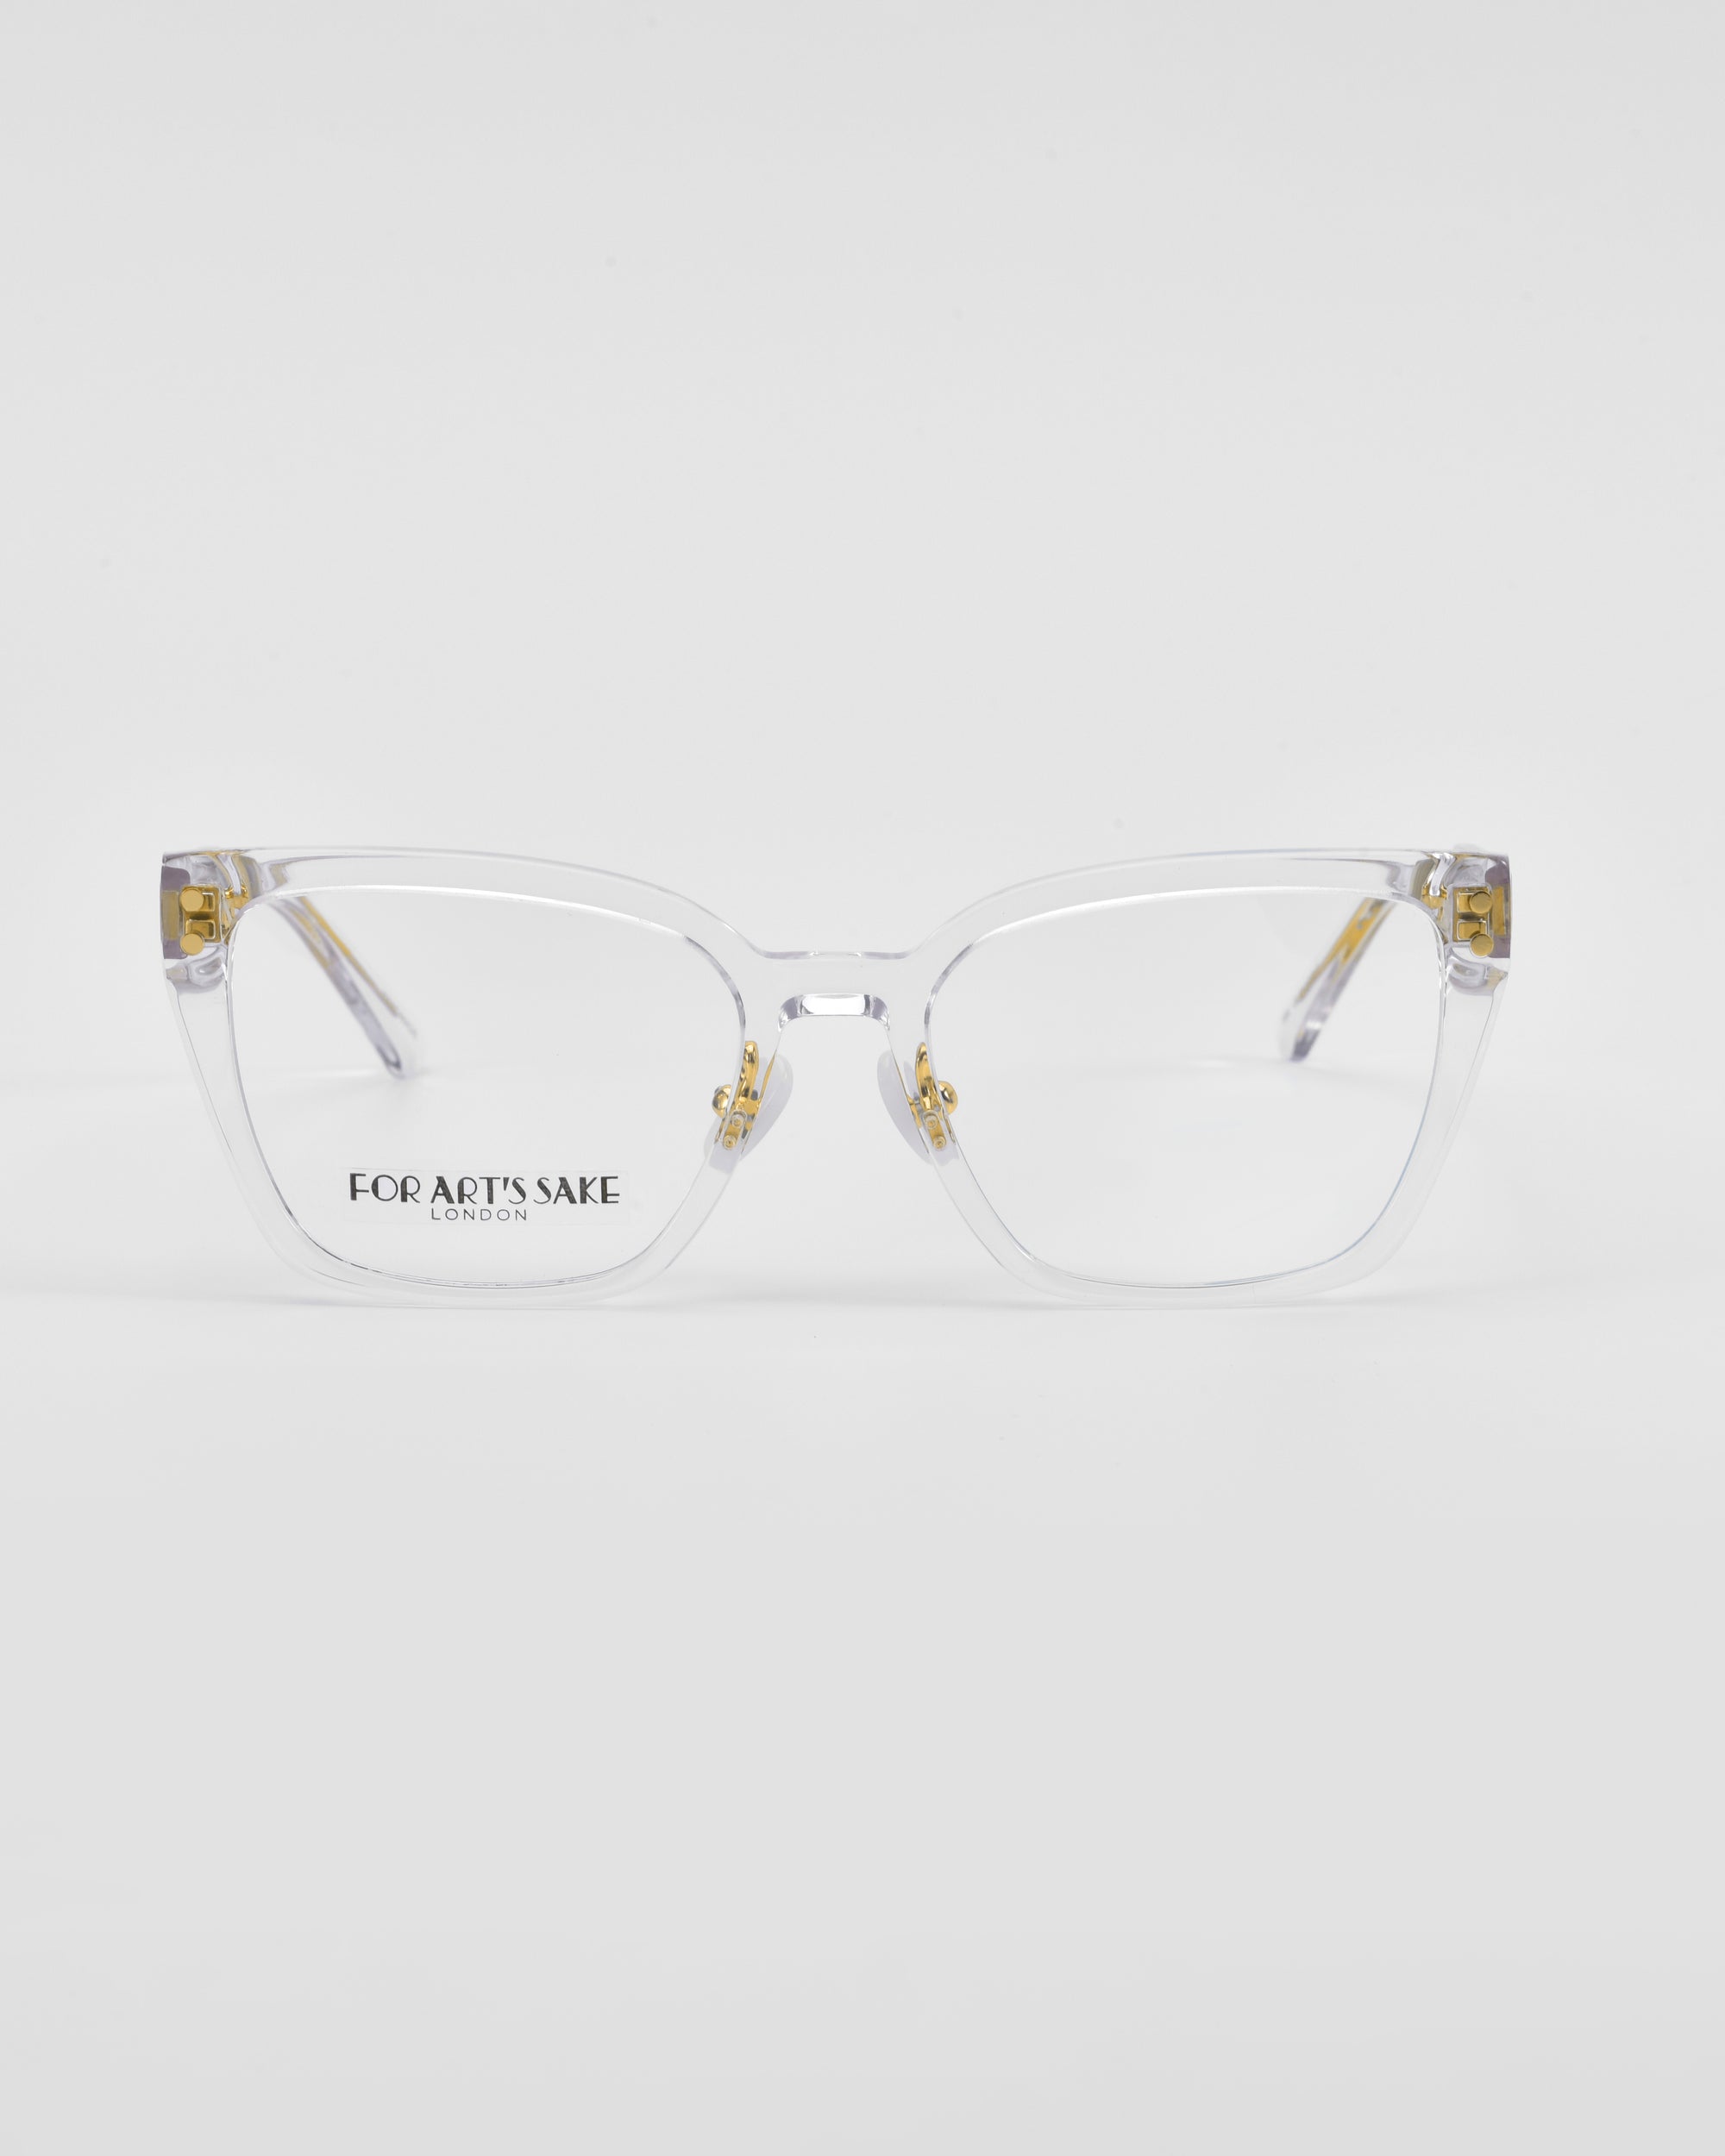 A pair of clear-framed Abbey eyeglasses with slightly oversized square lenses. The temples have a hint of gold-plated detail, and the brand For Art&#39;s Sake® is subtly printed on the inside of the right lens near the temple. The background is a plain white.